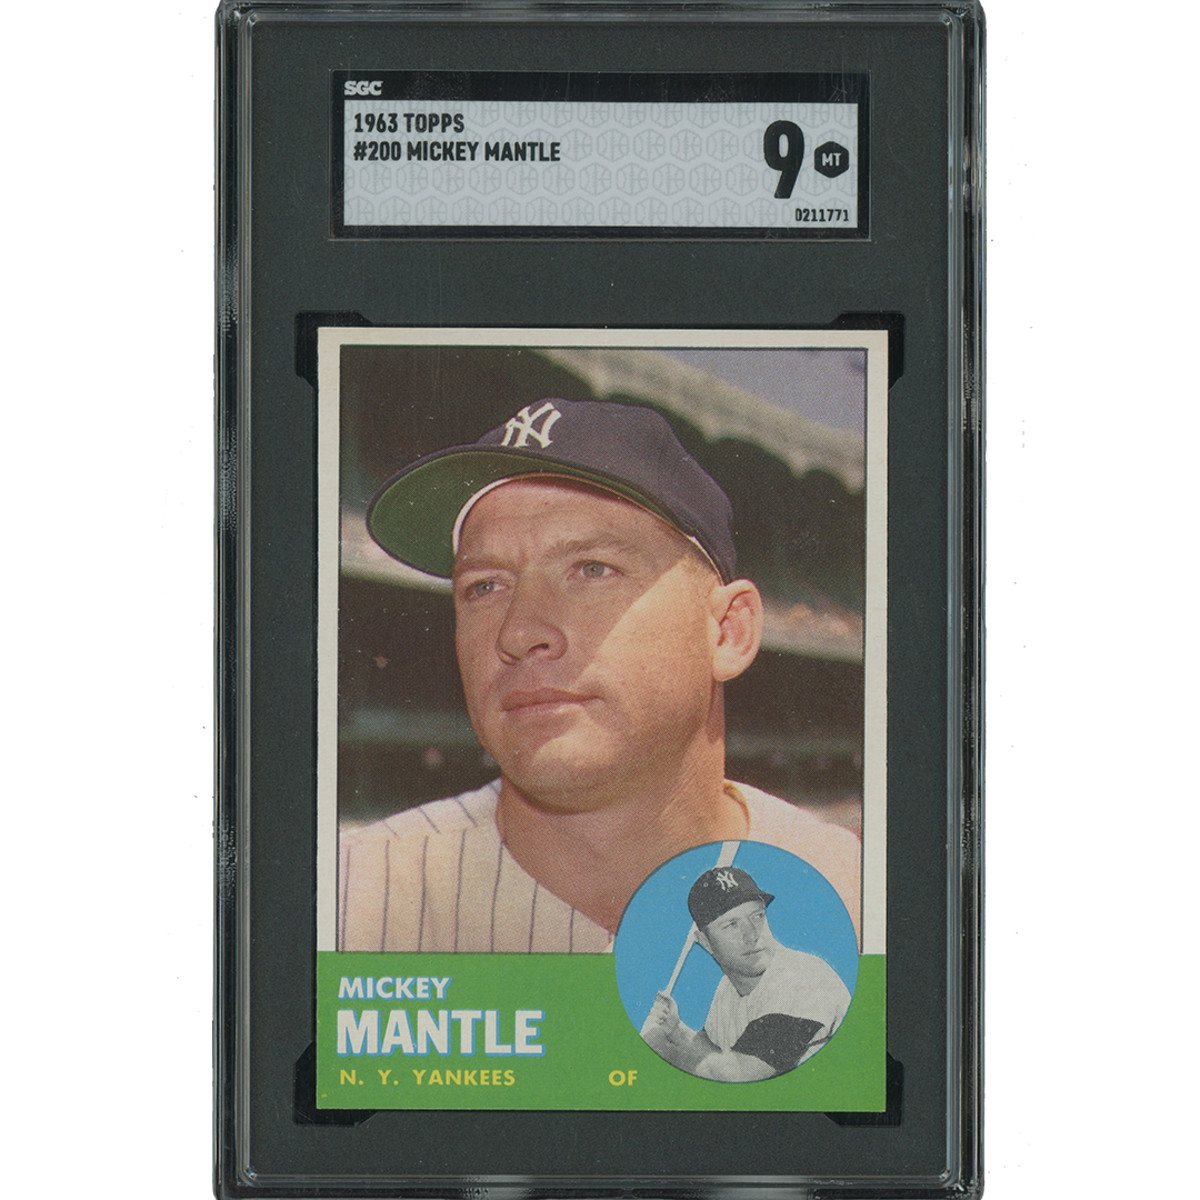 1963 Topps Mickey Mantle card.